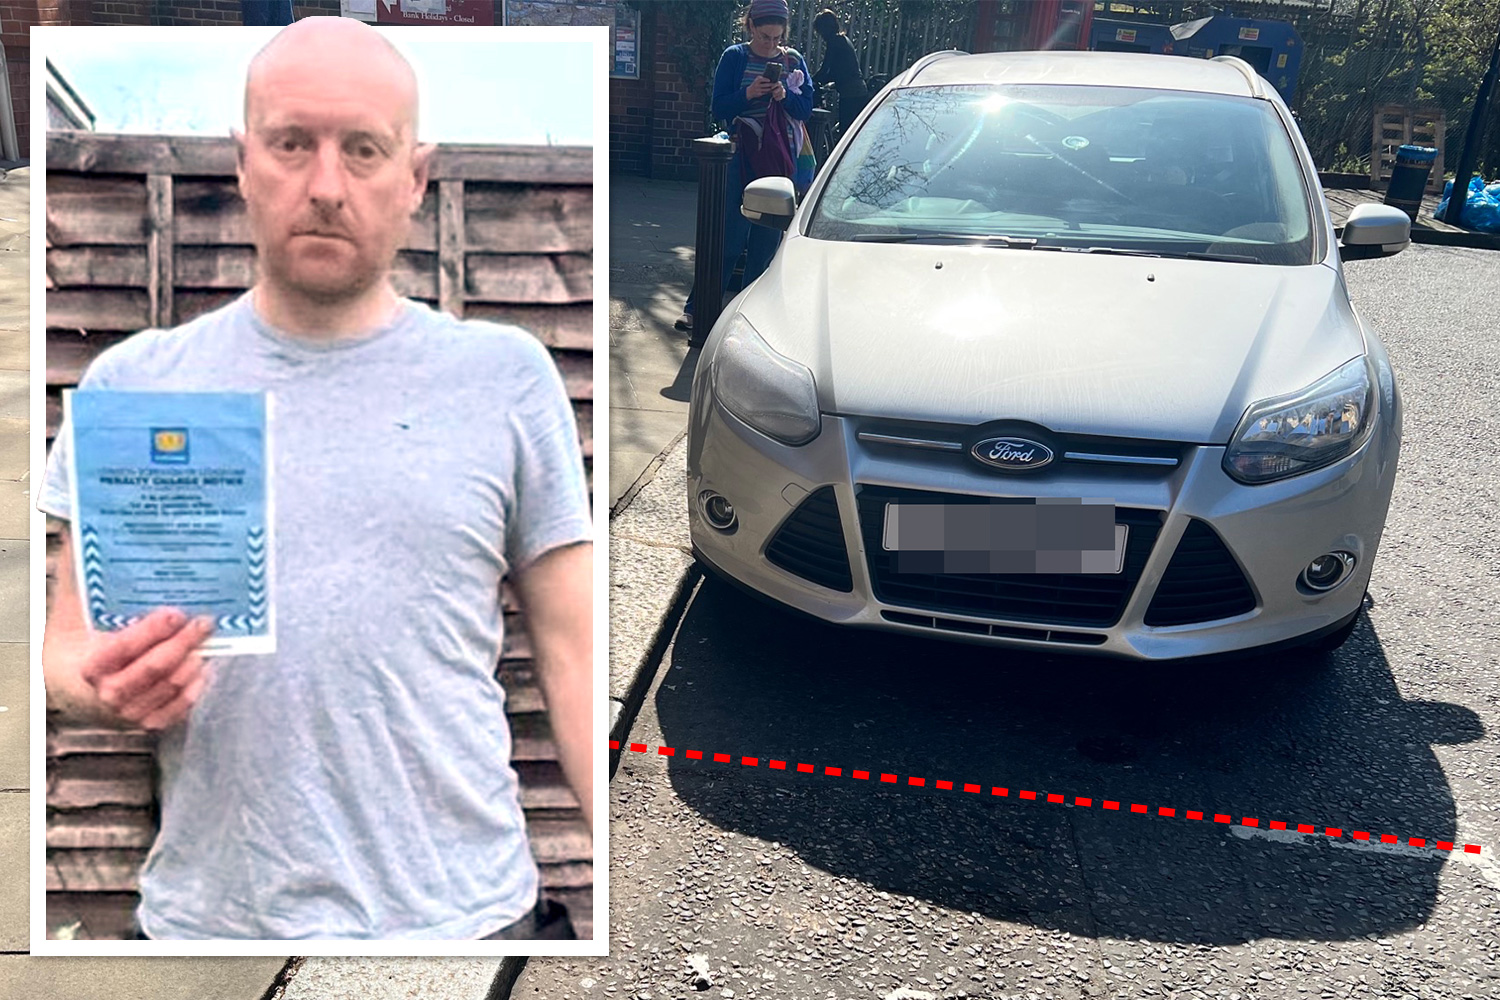 A Man Penalized Of £65 Because His Car's Shadow Was In Disabled Parking Space